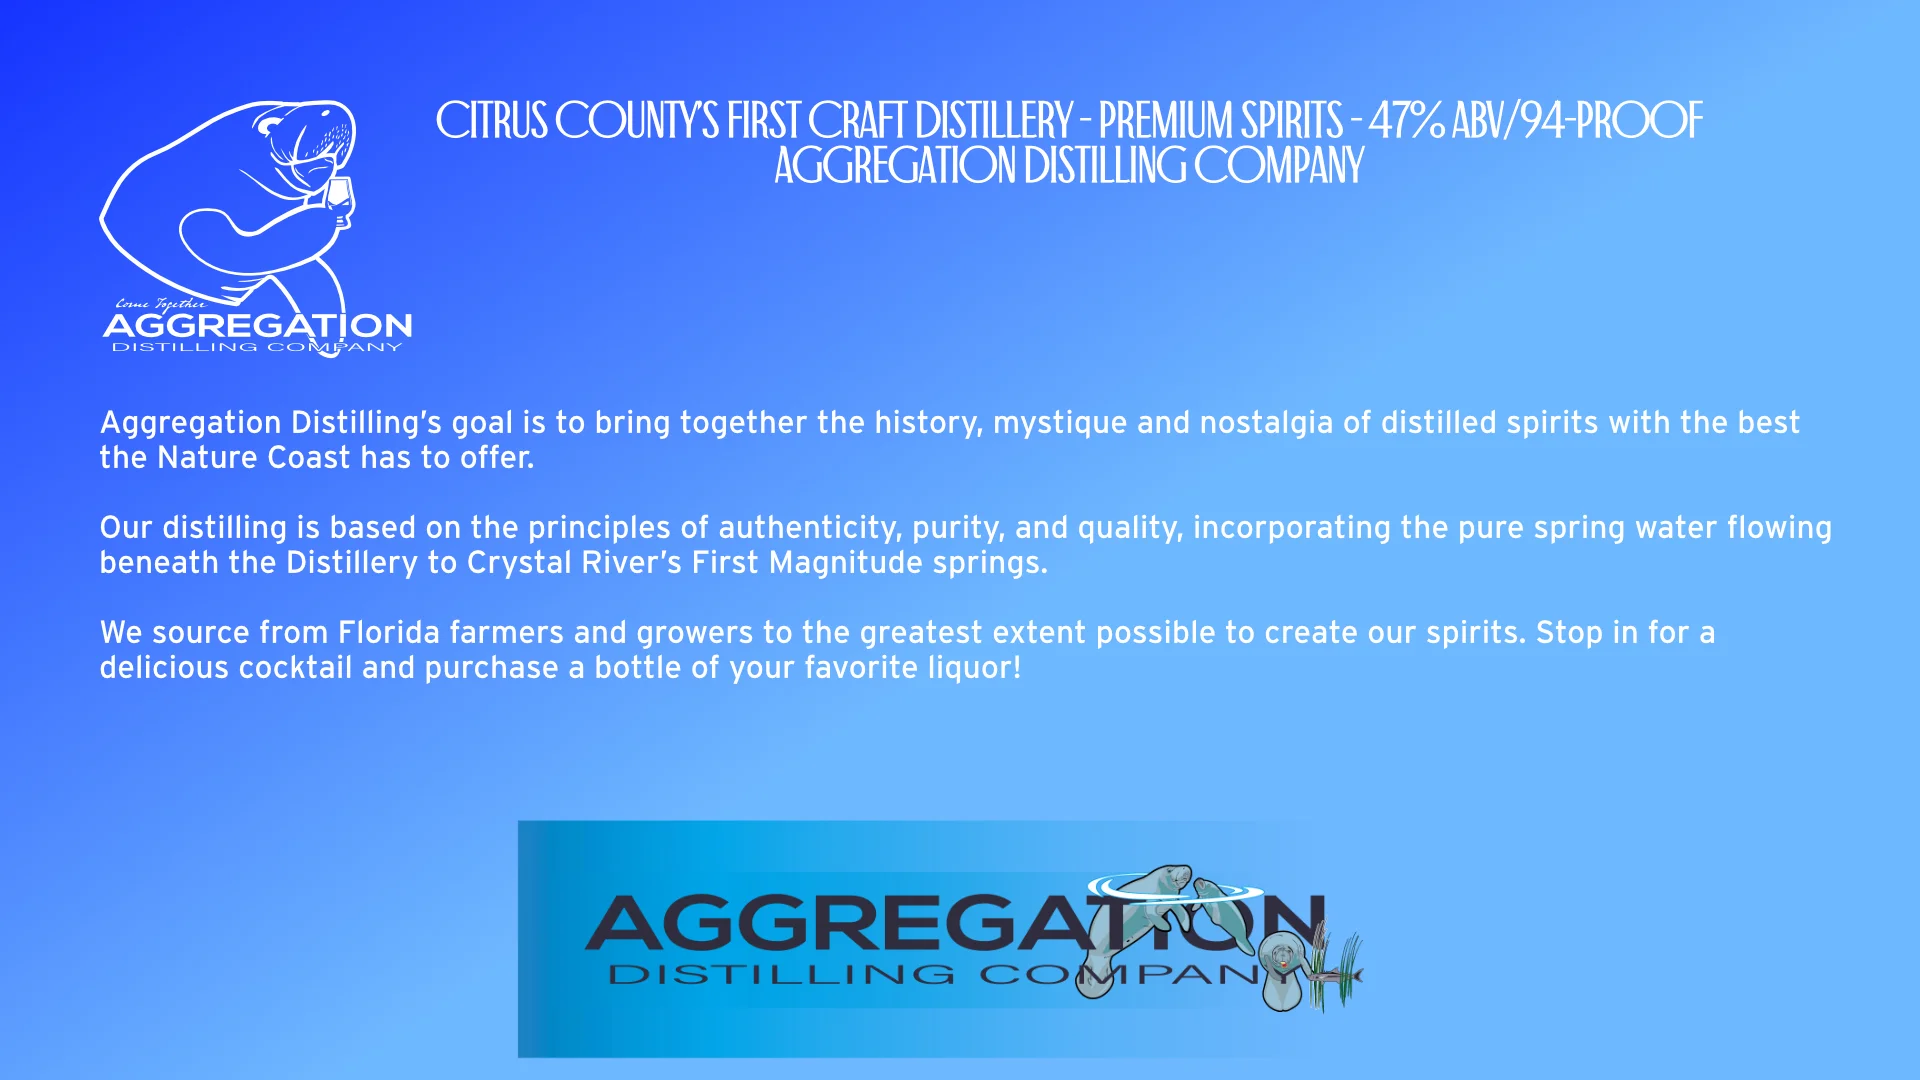 Page two: A blue field with white heading: Premium Spirits - 47 percent A B V, or 94 Proof. 
            Body: Aggregation Distilling’s goal is to bring together the history, mystique and nostalgia of distilled spirits with the best the Nature Coast has to offer. 

            Our distilling is based on the principles of authenticity, purity, and quality, incorporating the pure spring water flowing beneath the Distillery to Crystal River’s First Magnitude springs.
            
            We source from Florida farmers and growers to the greatest extent possible to create our spirits. Stop in for a delicious cocktail and to purchase a bottle of your favorite liquor! 
            
            The bottom of the page has an Aggregation banner, with the Ethanol logo, comprised of a family of manatees. The mommy and baby manatee break the water's surface with their noses, their bodies at 109.5 degree angle to one another, while on the right-hand side is Happy the manatee, viewed head-on looking like the letter O, and beside him a cobia fish swims through two sets of sea grass, forming a letter H.